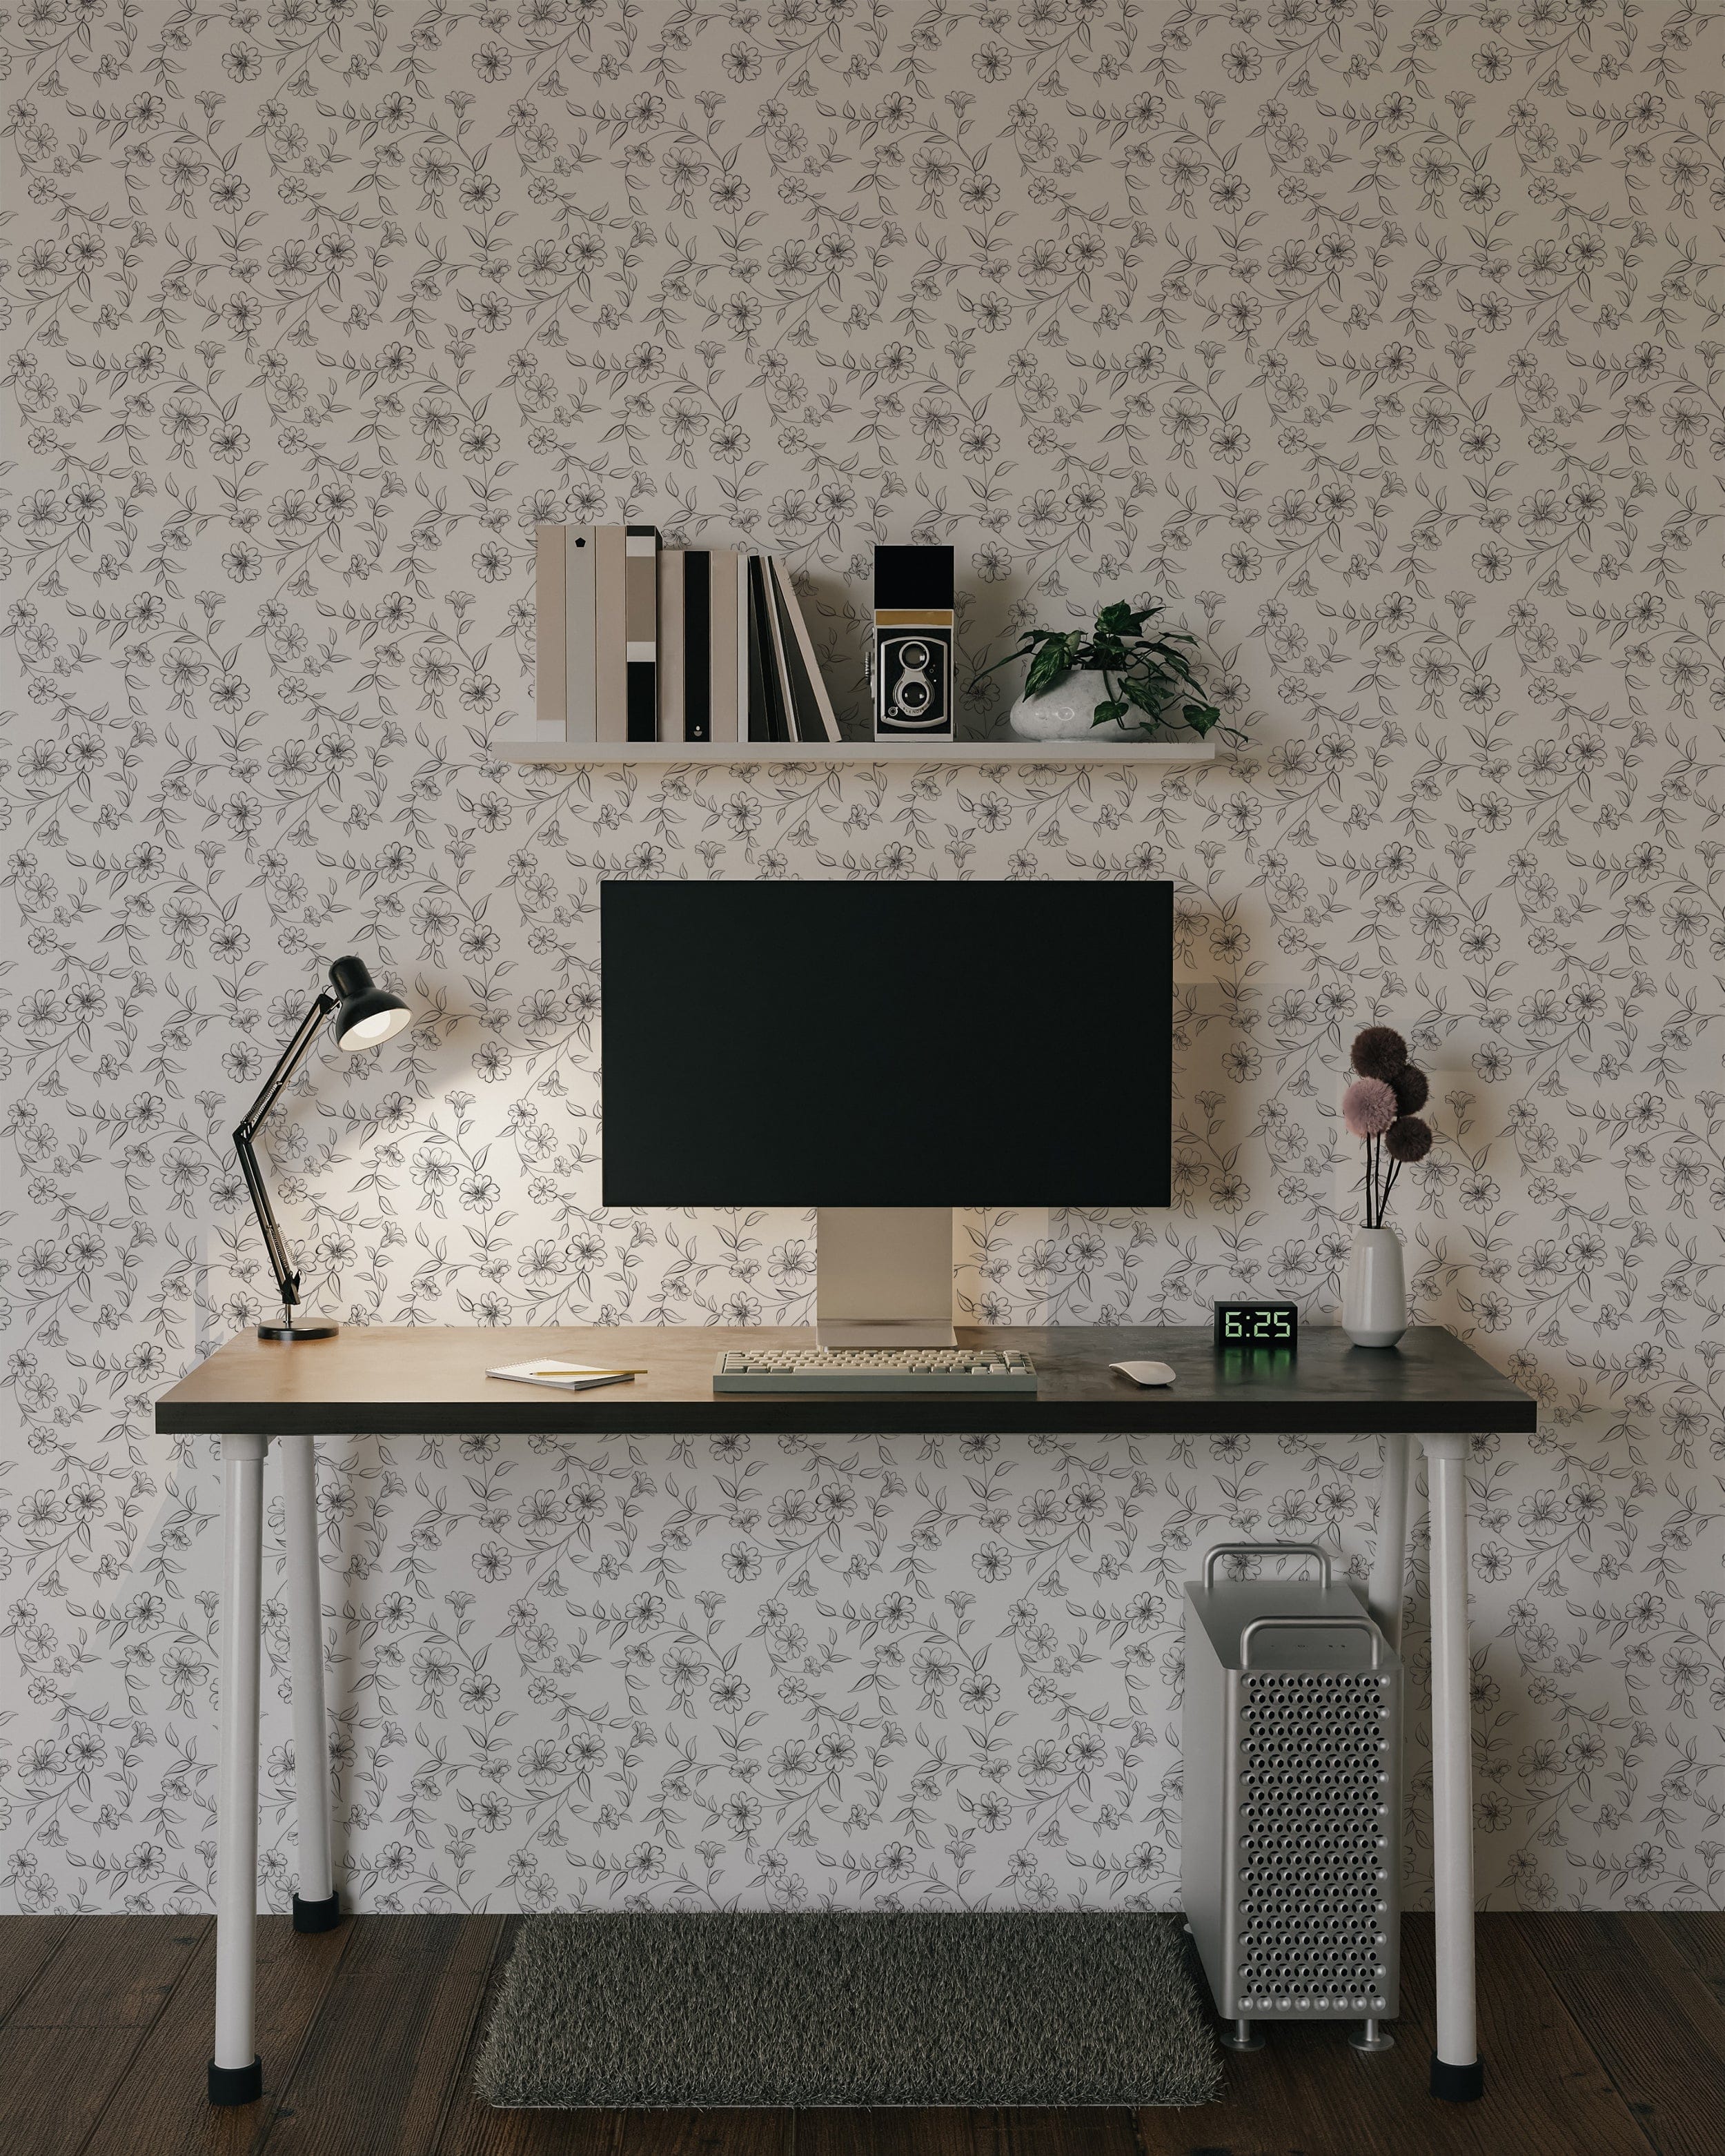 A modern workspace with a desk and computer set against a wall covered in elegant monochrome wallpaper. The wallpaper features a delicate black and white floral pattern, adding a touch of sophistication and style to the space. The desk is adorned with a lamp, a clock, and a vase, creating a clean and organized look